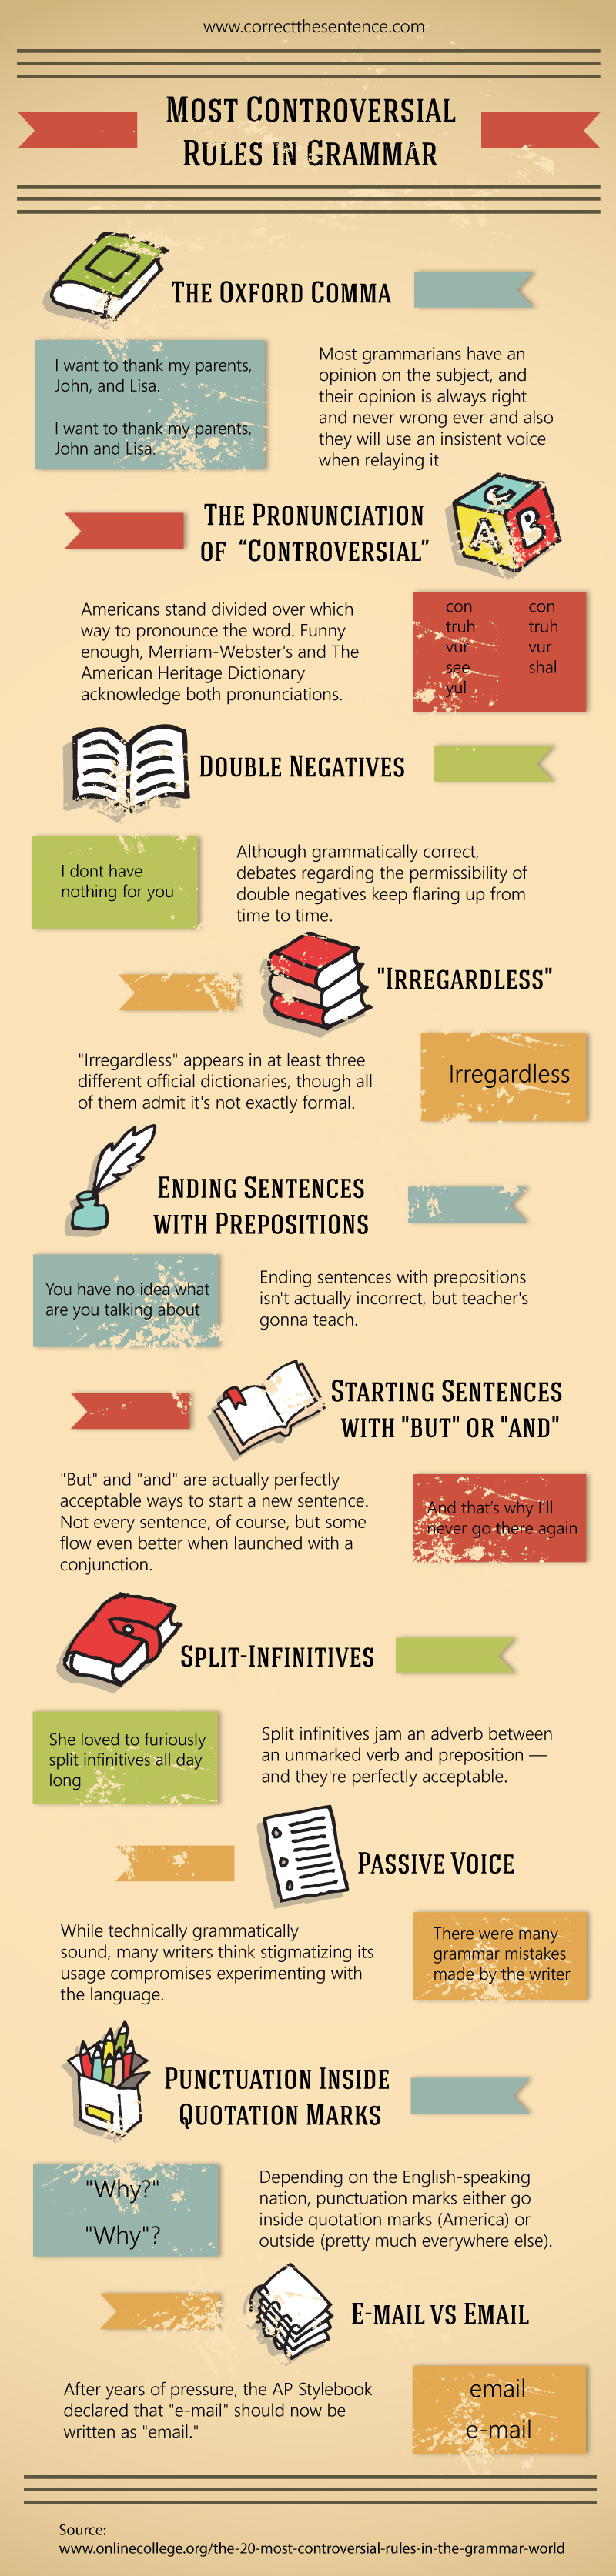 most controversial rules in grammar